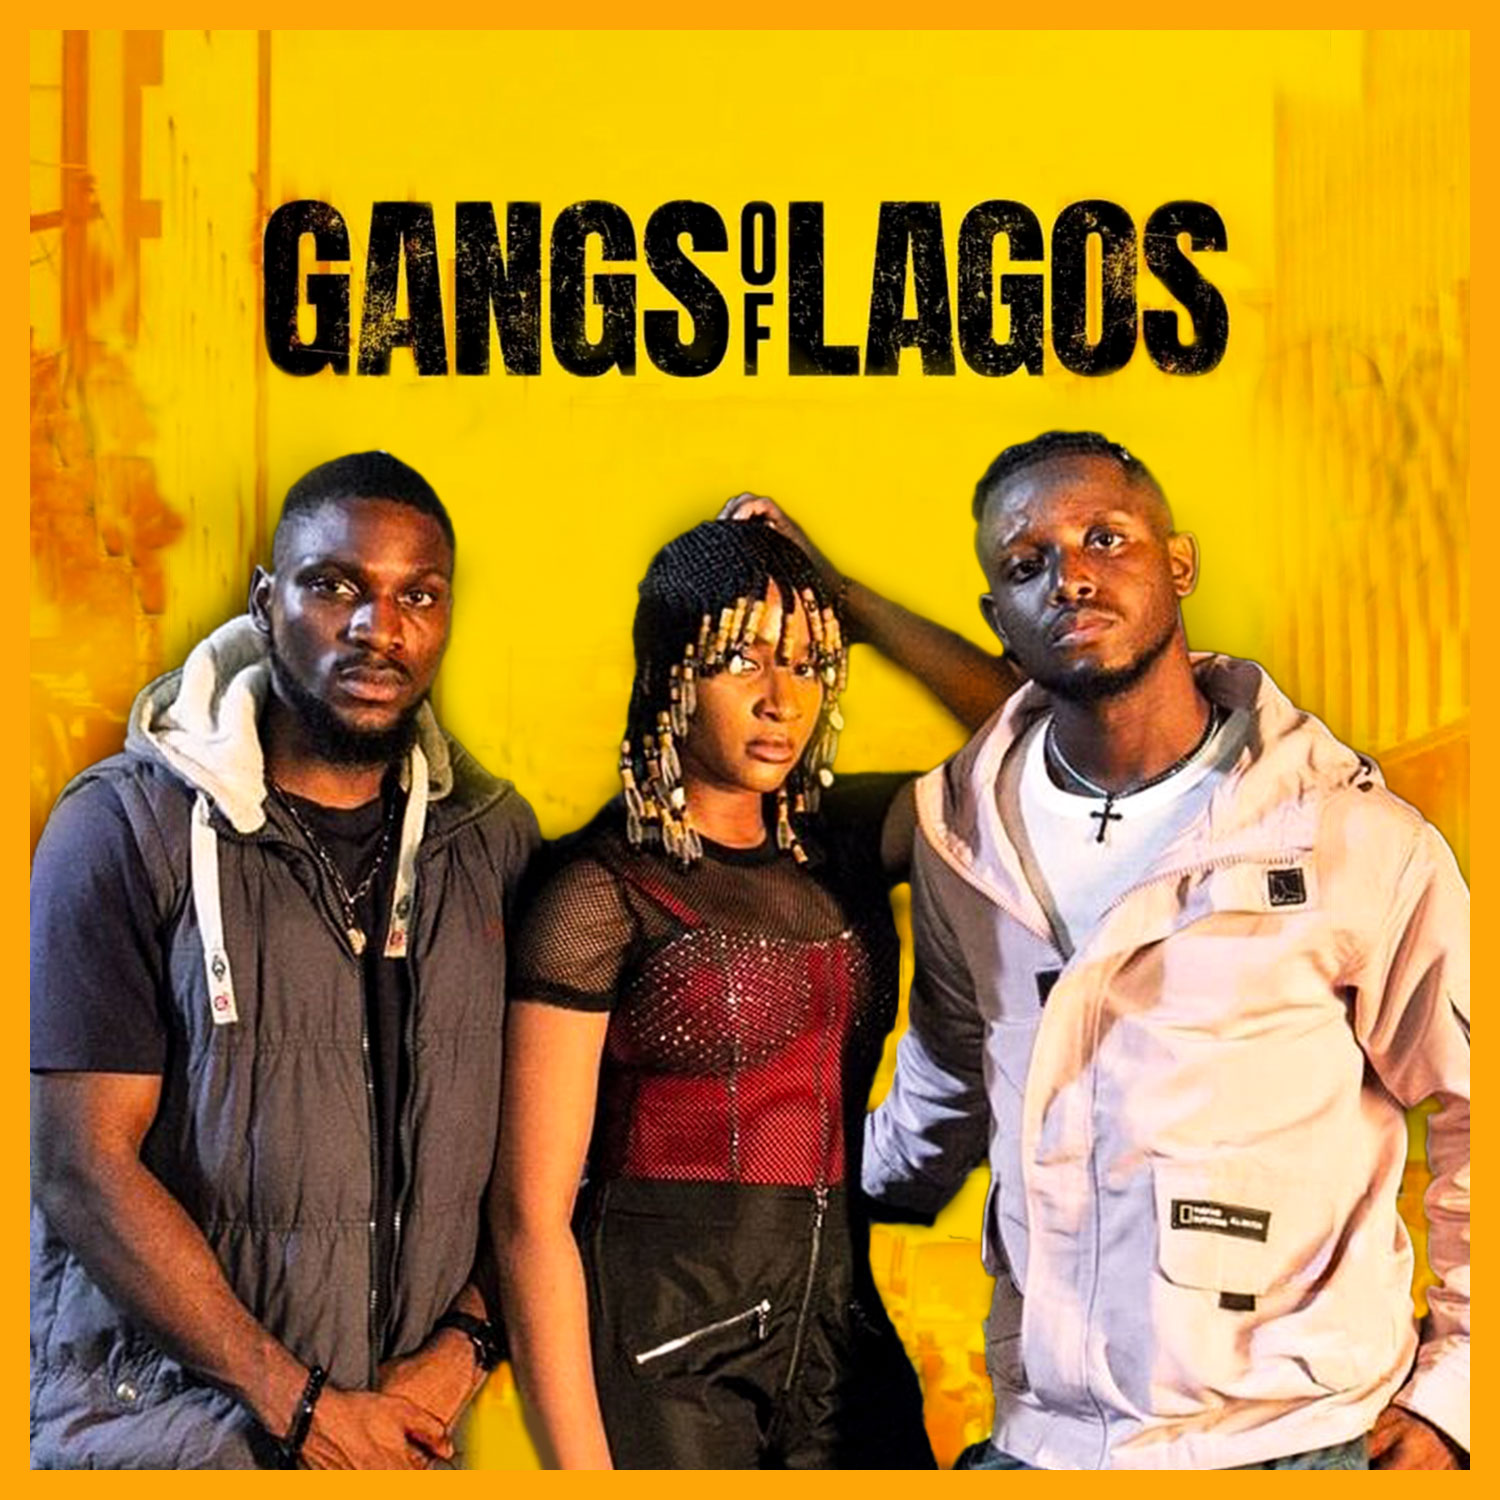 Gangs of Lagos: A Creative Thriller or a Reel of Half-Truths?